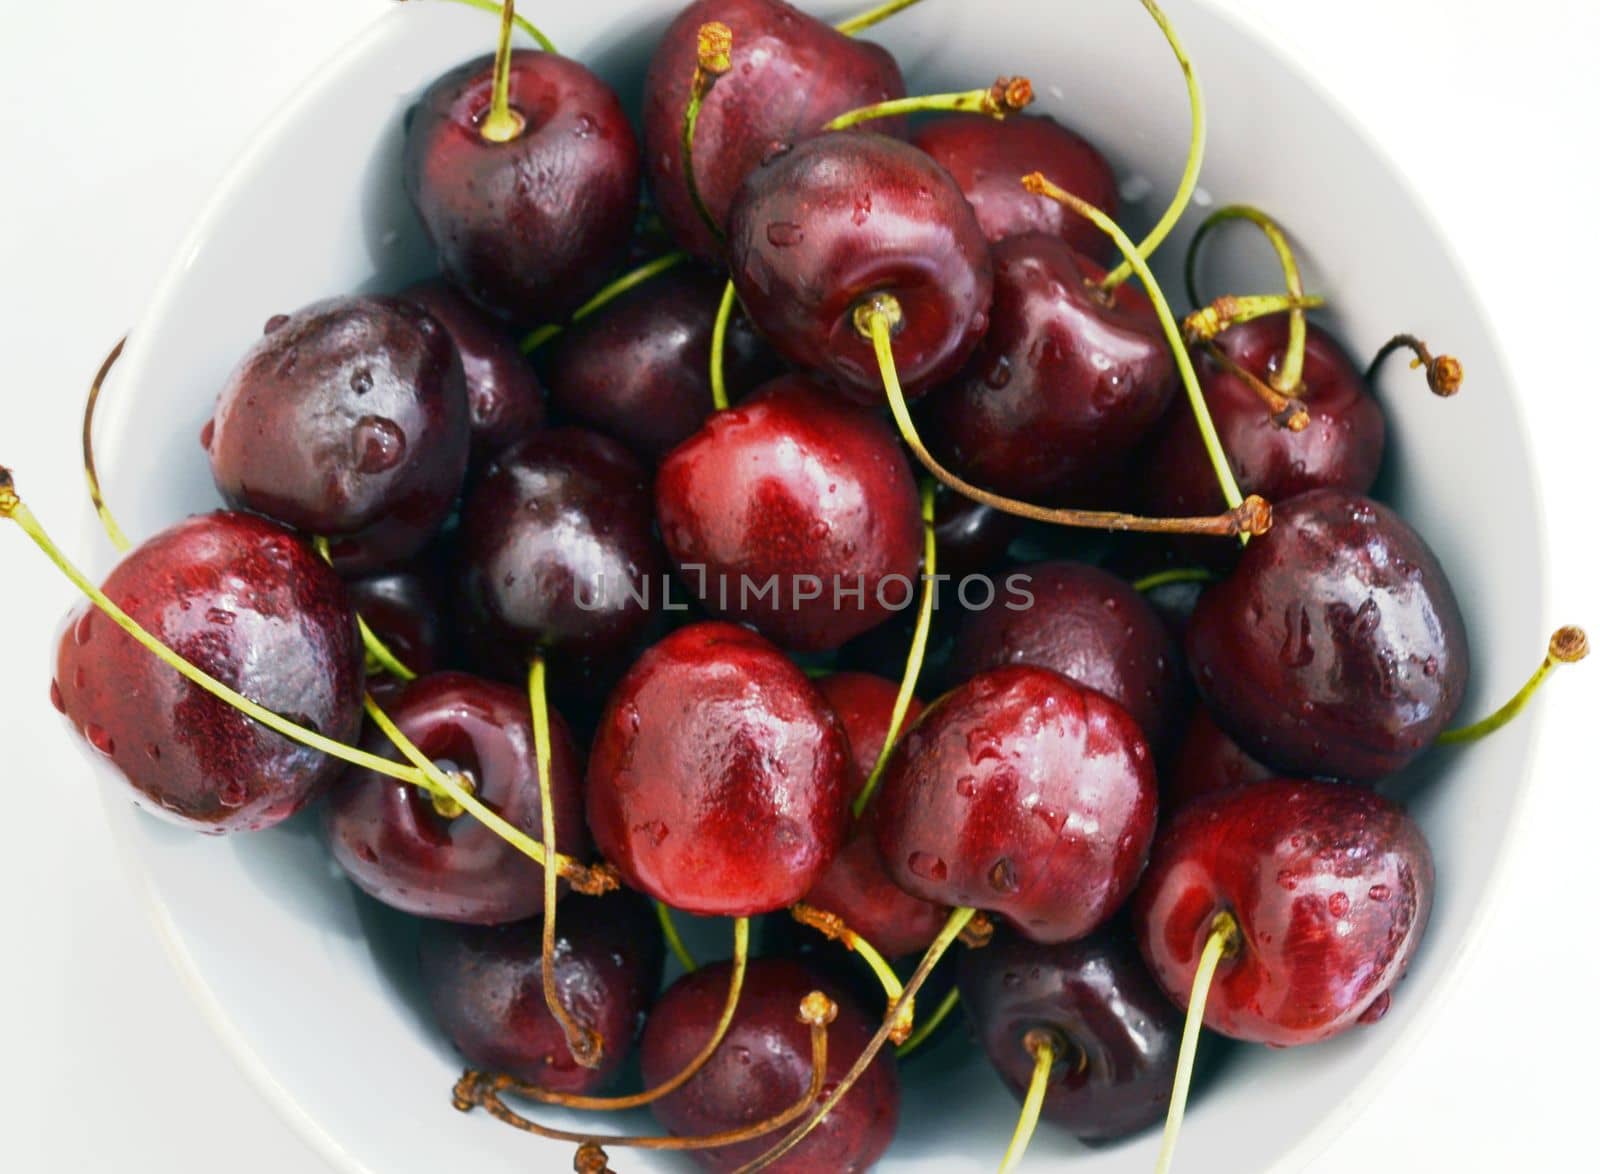 Cherry in a bowl on a white background.